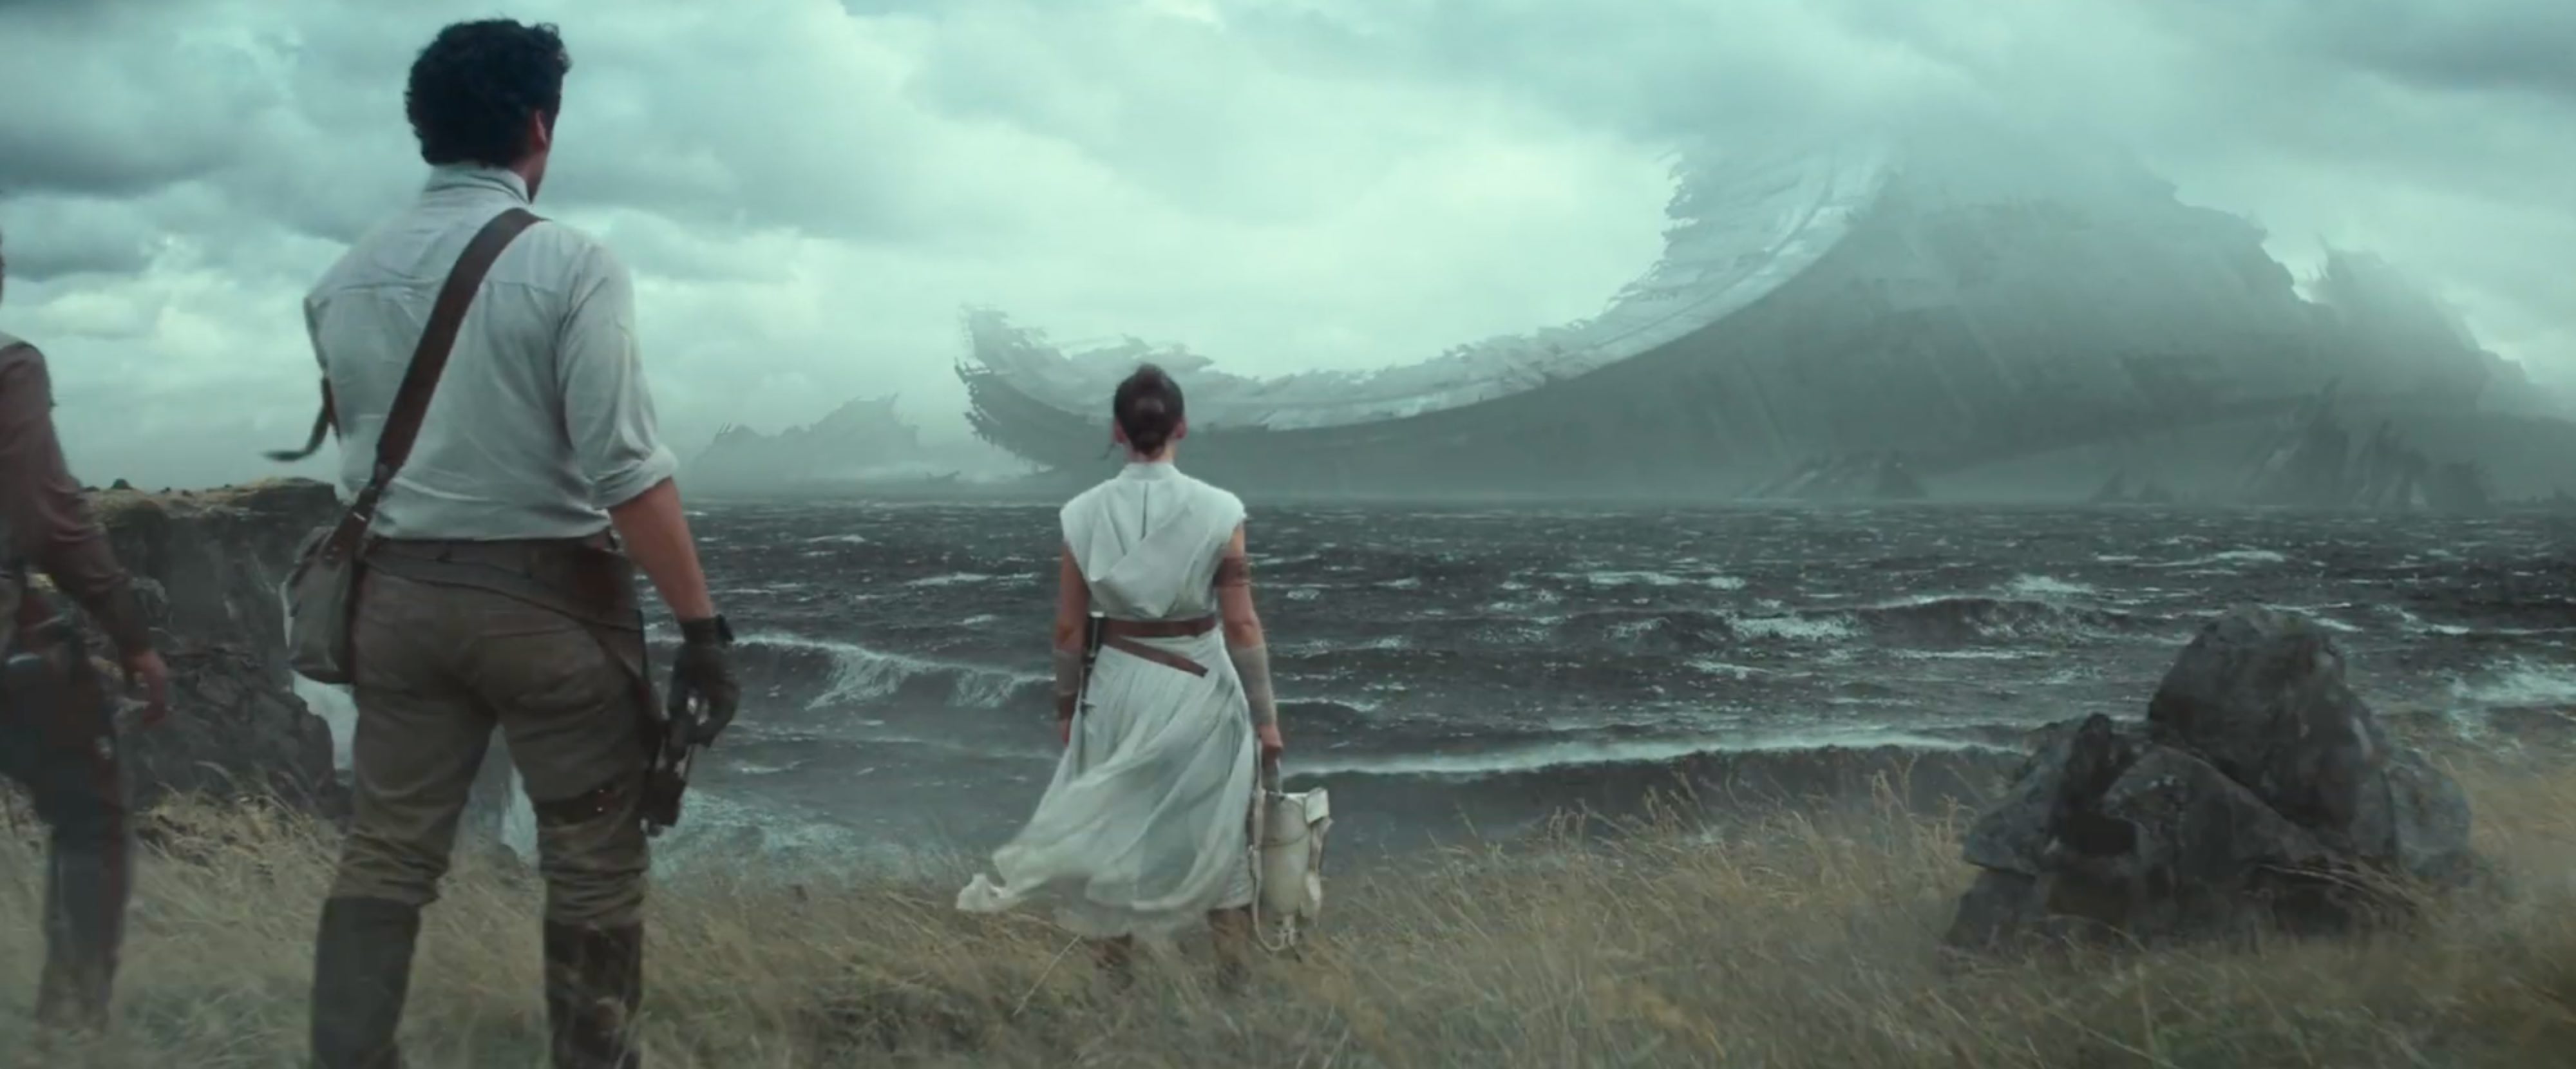 Star Wars: The Rise Of Skywalker Passes $400M At North American Box Office